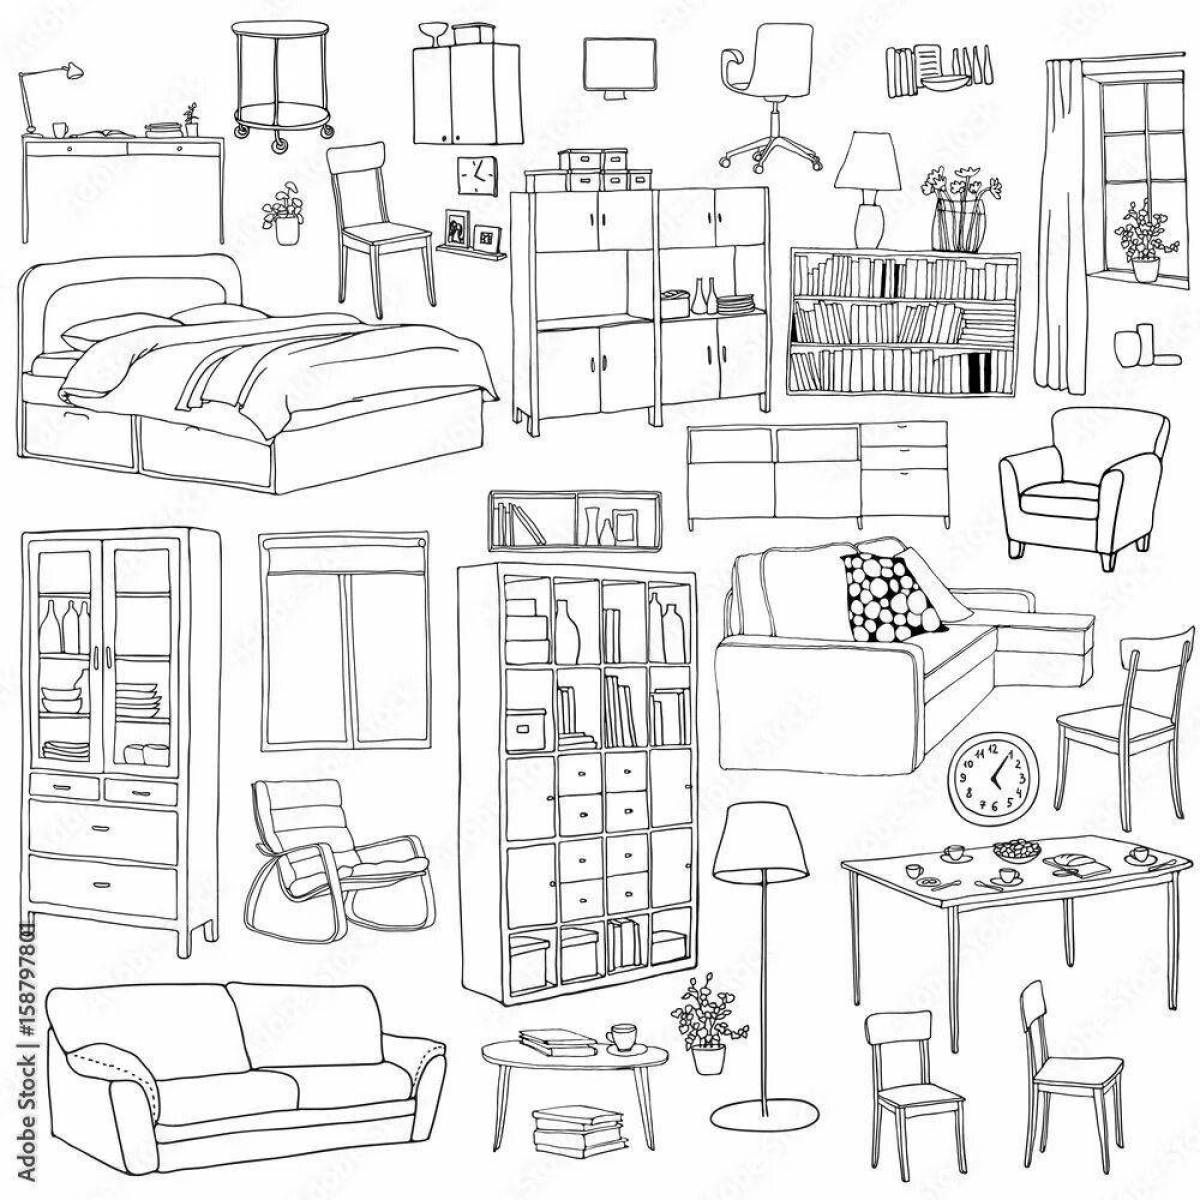 Ami's exquisite furniture house coloring page